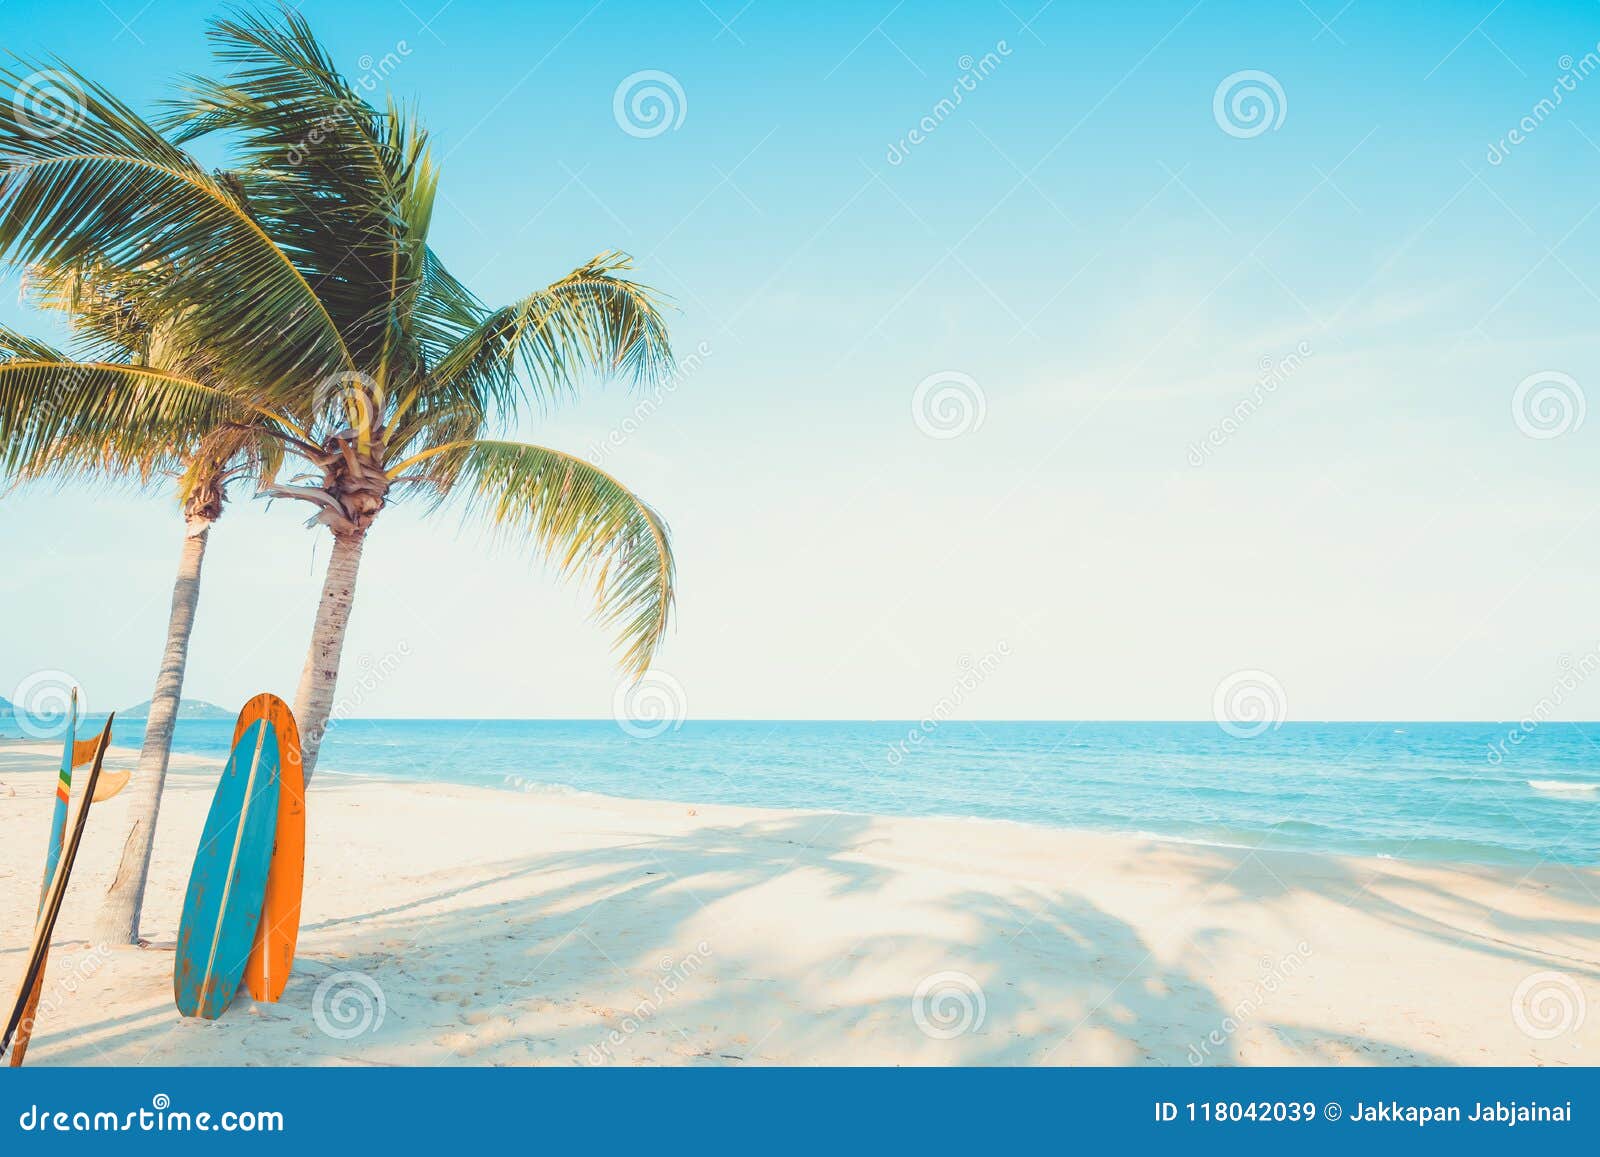 vintage surf board with palm tree on tropical beach